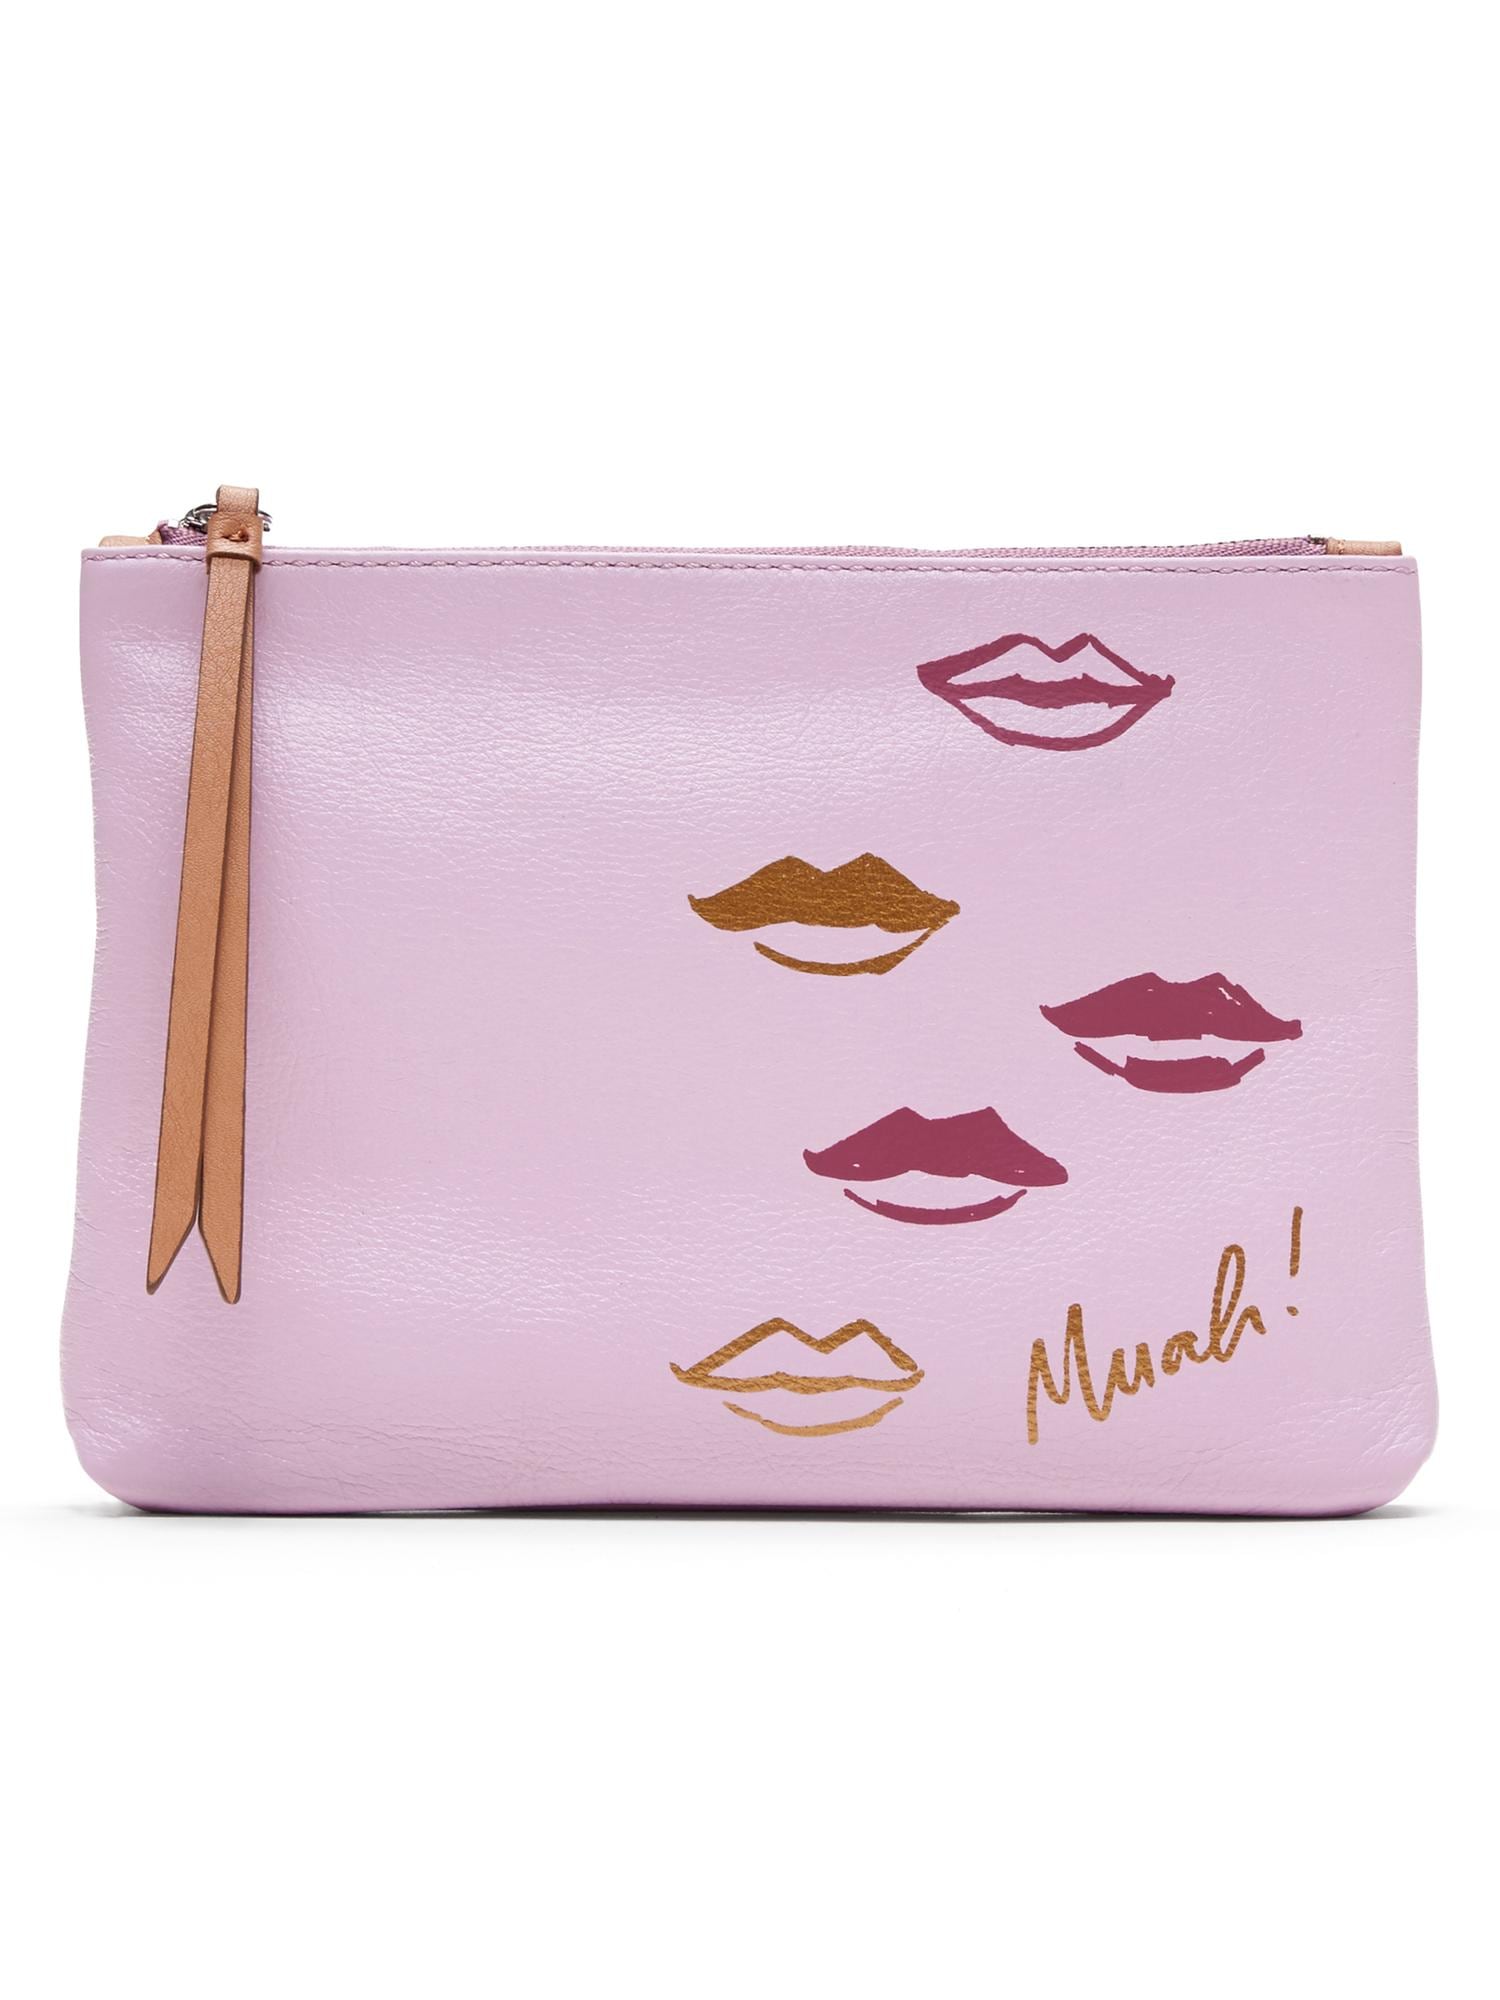 "Muah" Small Pouch